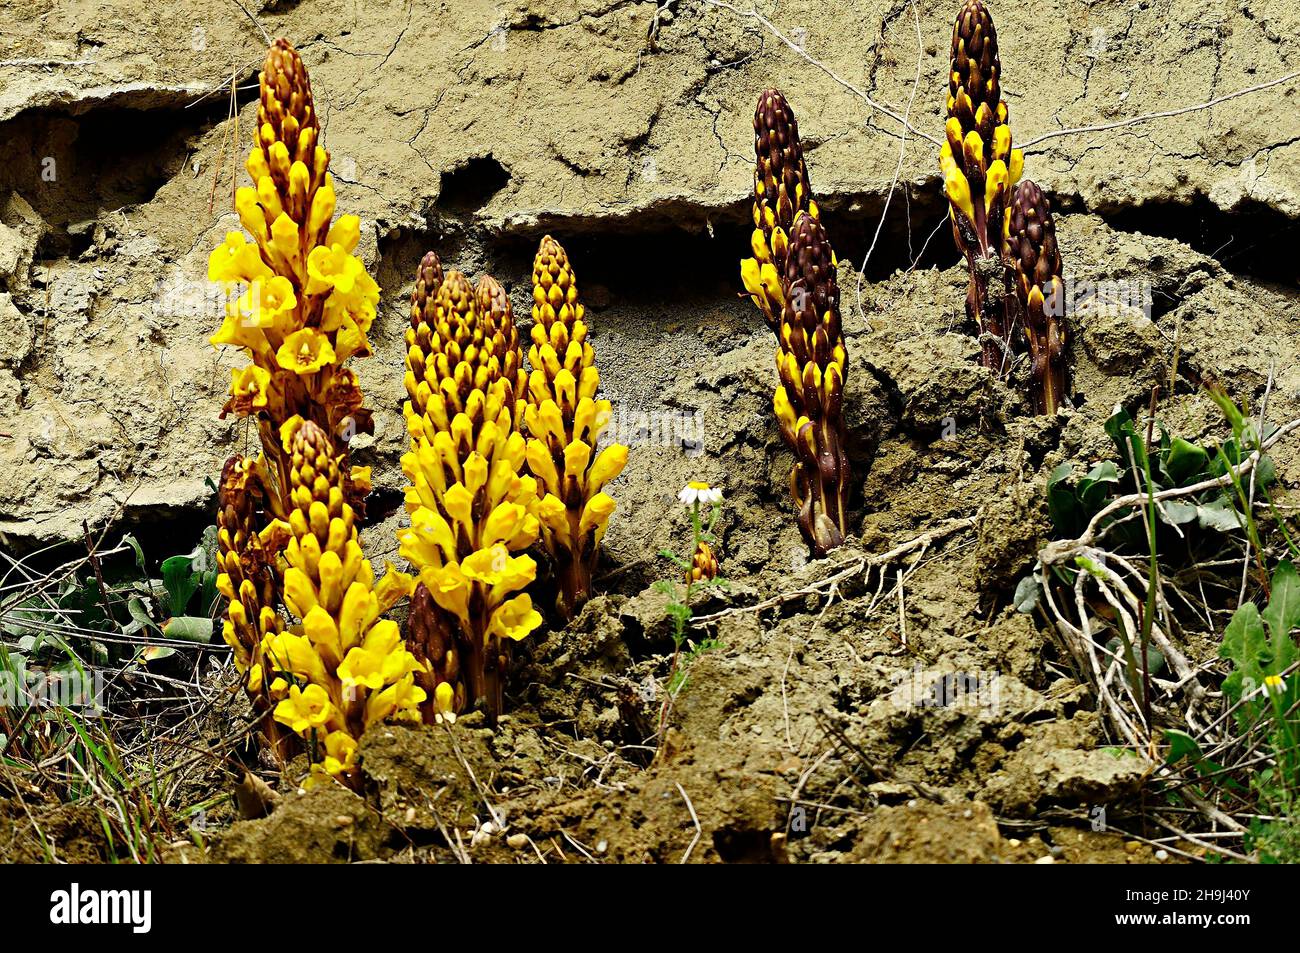 Cistanche phelypaea - Yellow Joppa, is a parasitic plant of the Orobanchaceae family. Stock Photo